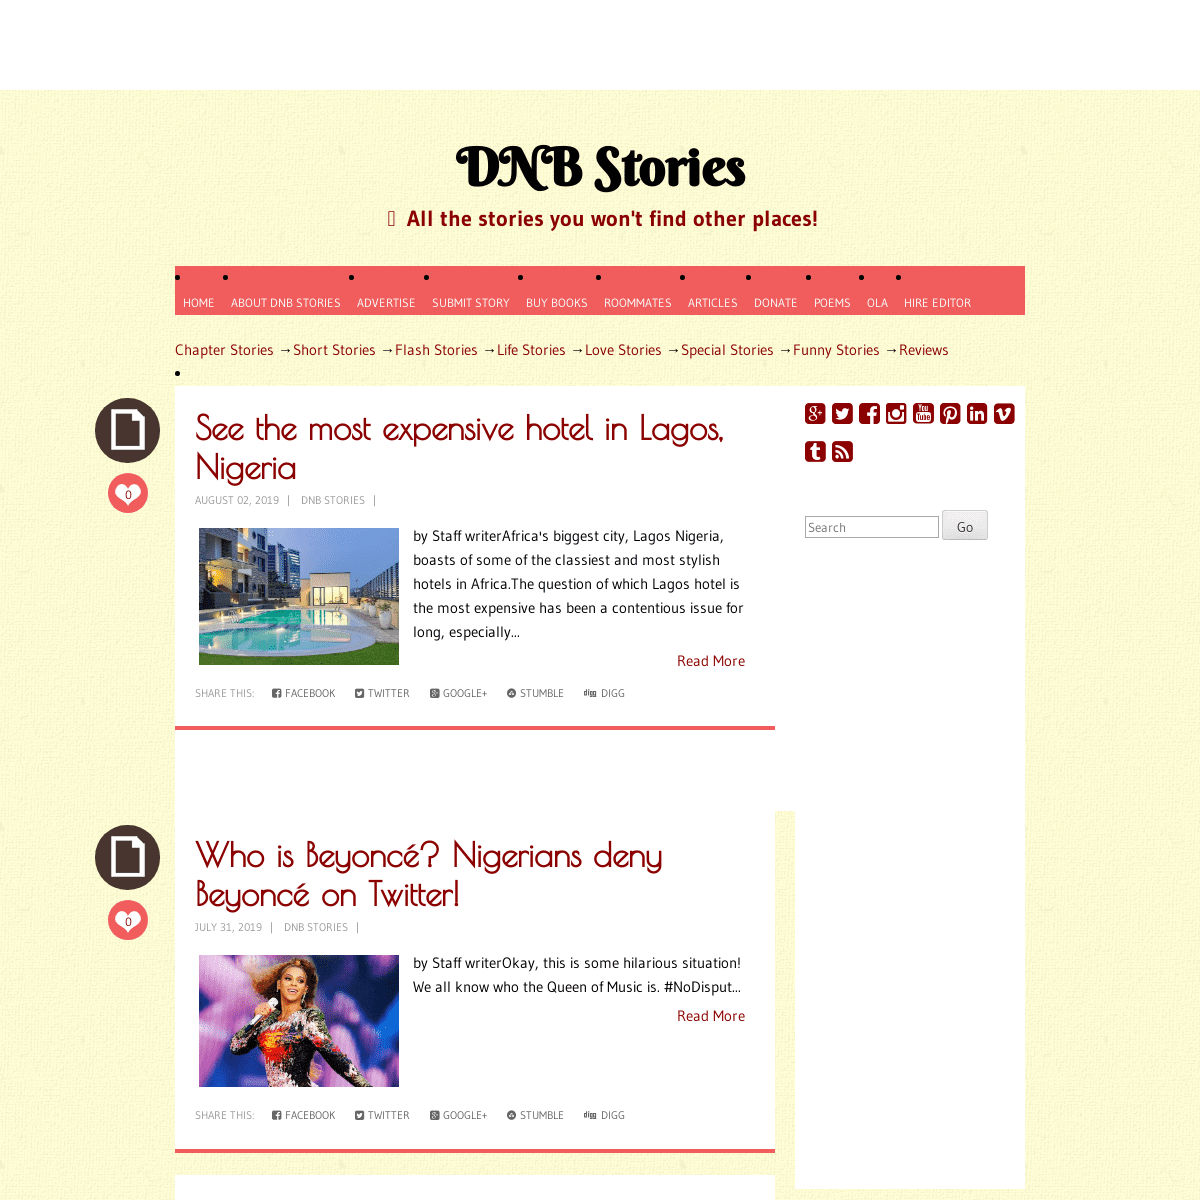 A complete backup of dnbstories.com